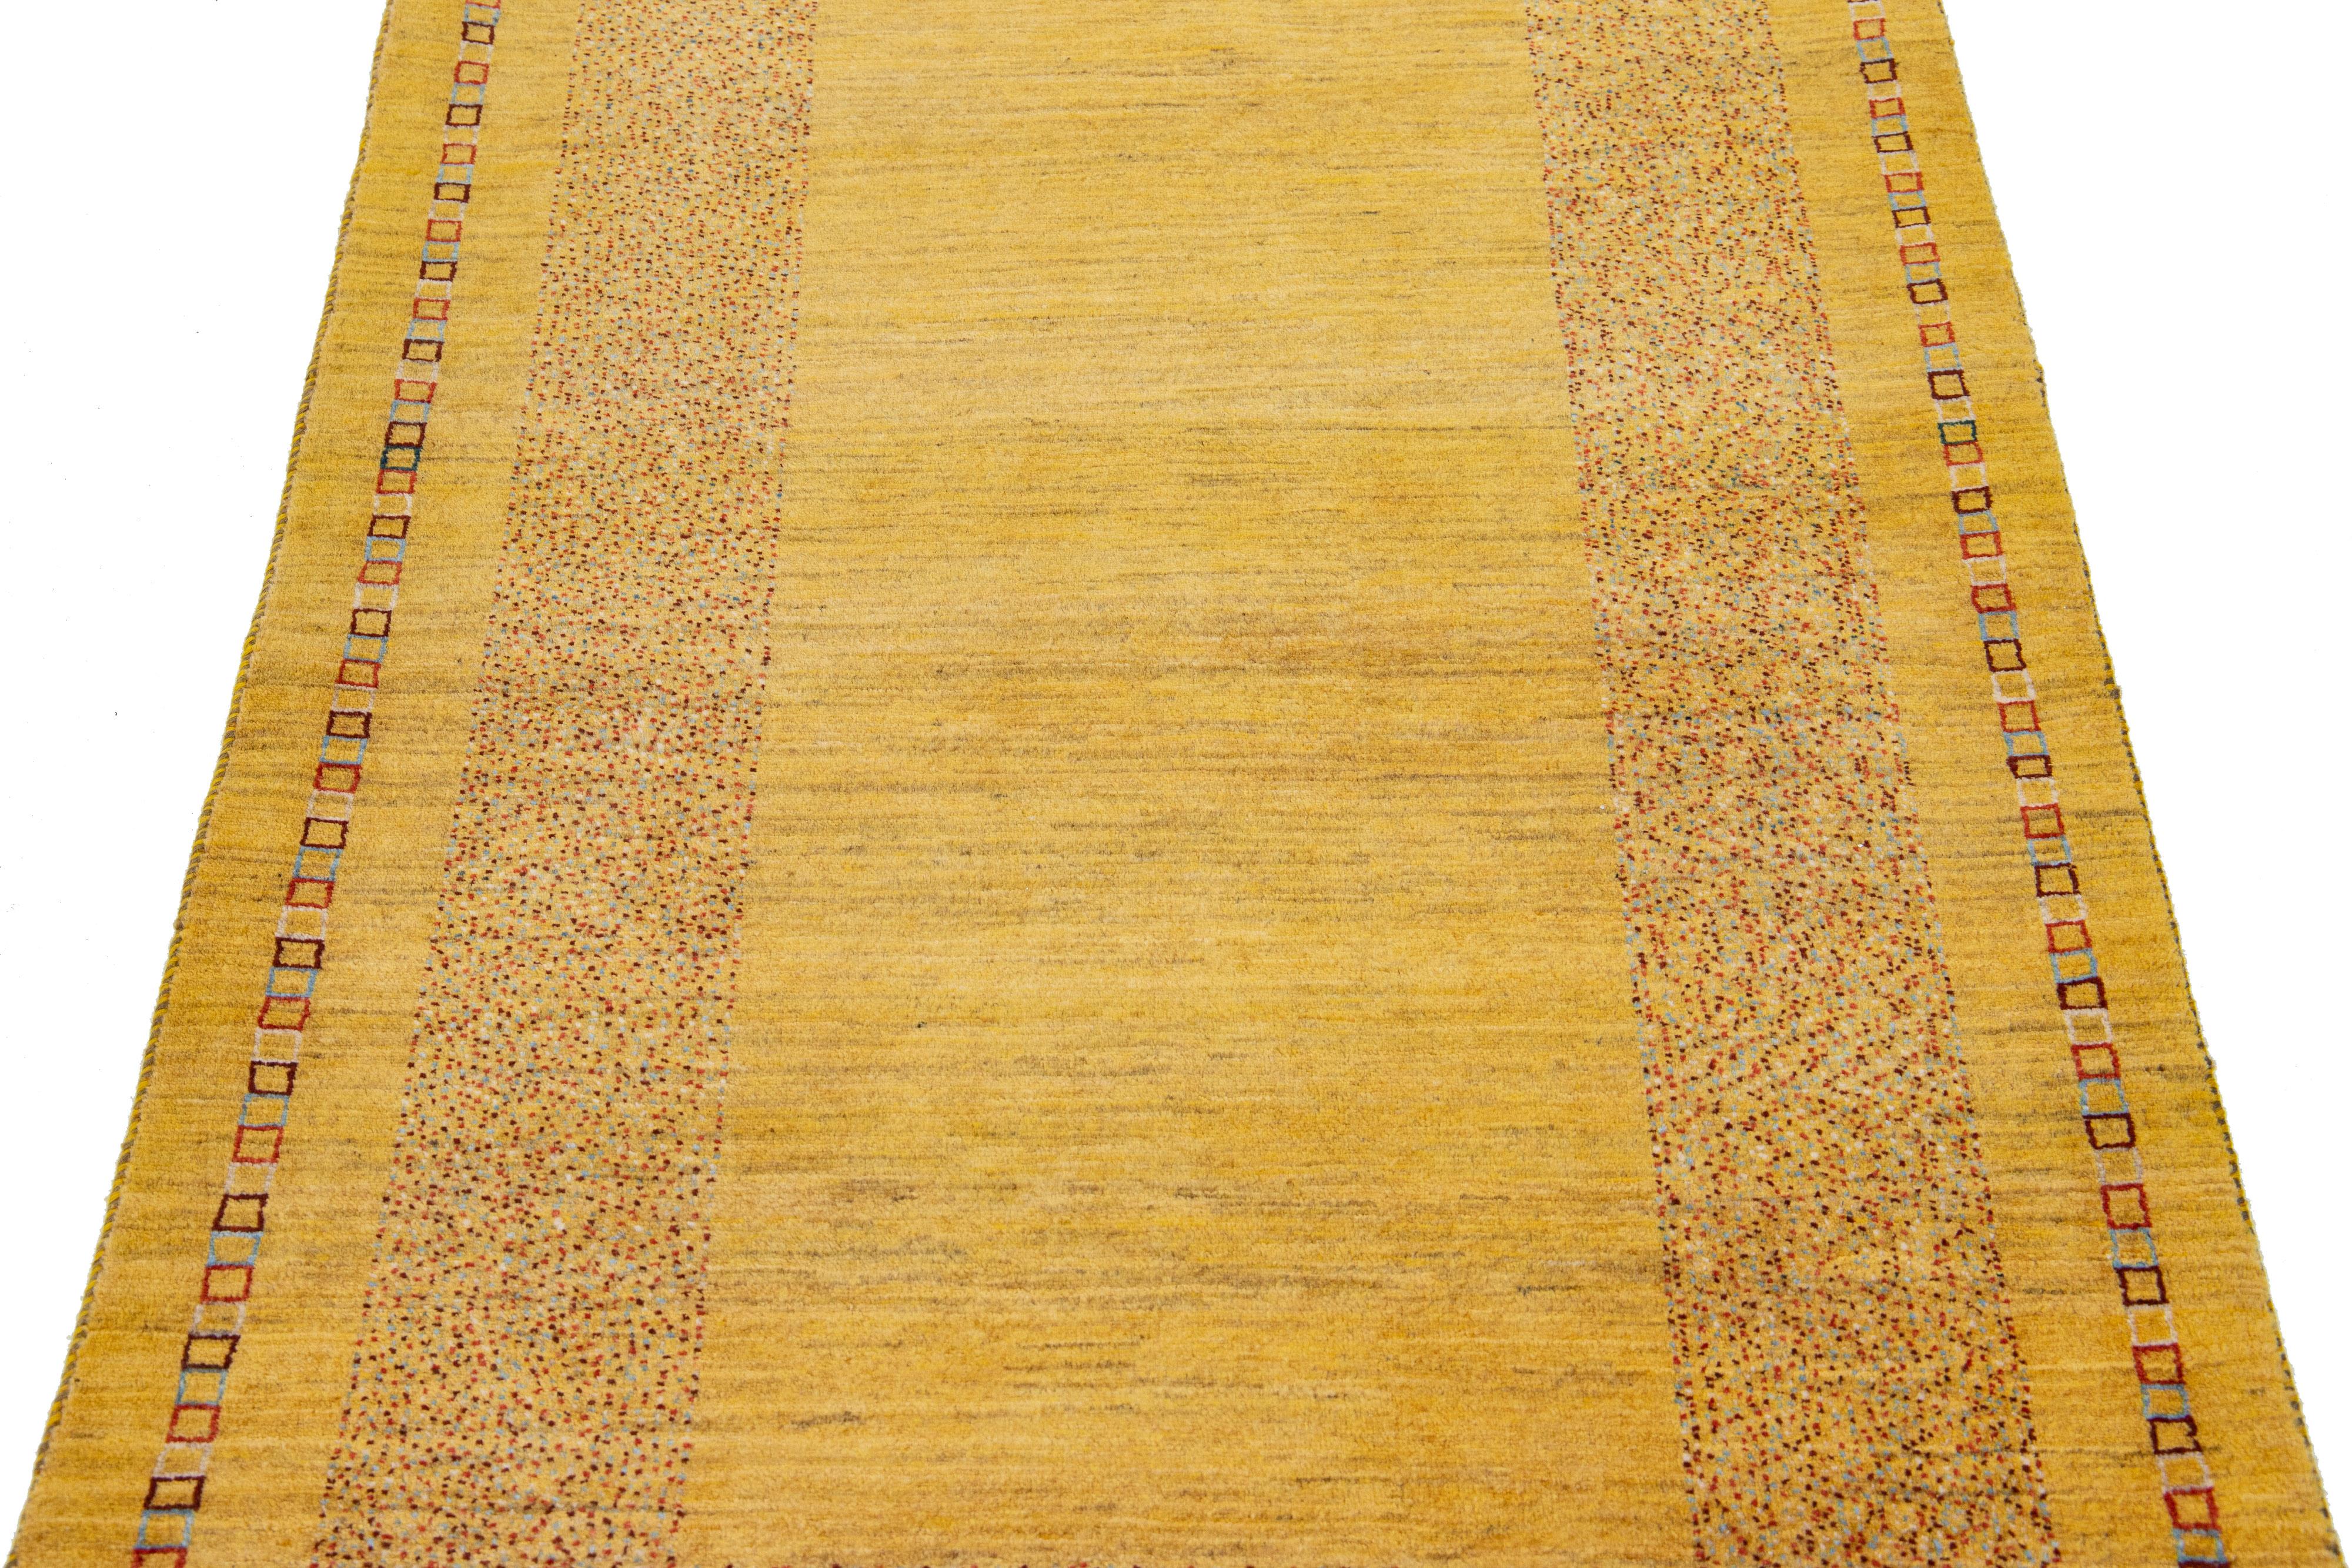 Beautiful modern Gabbeh-style hand-woven wool rug with a yellow color field. This Persian rug has a gorgeously minimalist design with brown, white, and blue accents.

This rug measures: 3'3